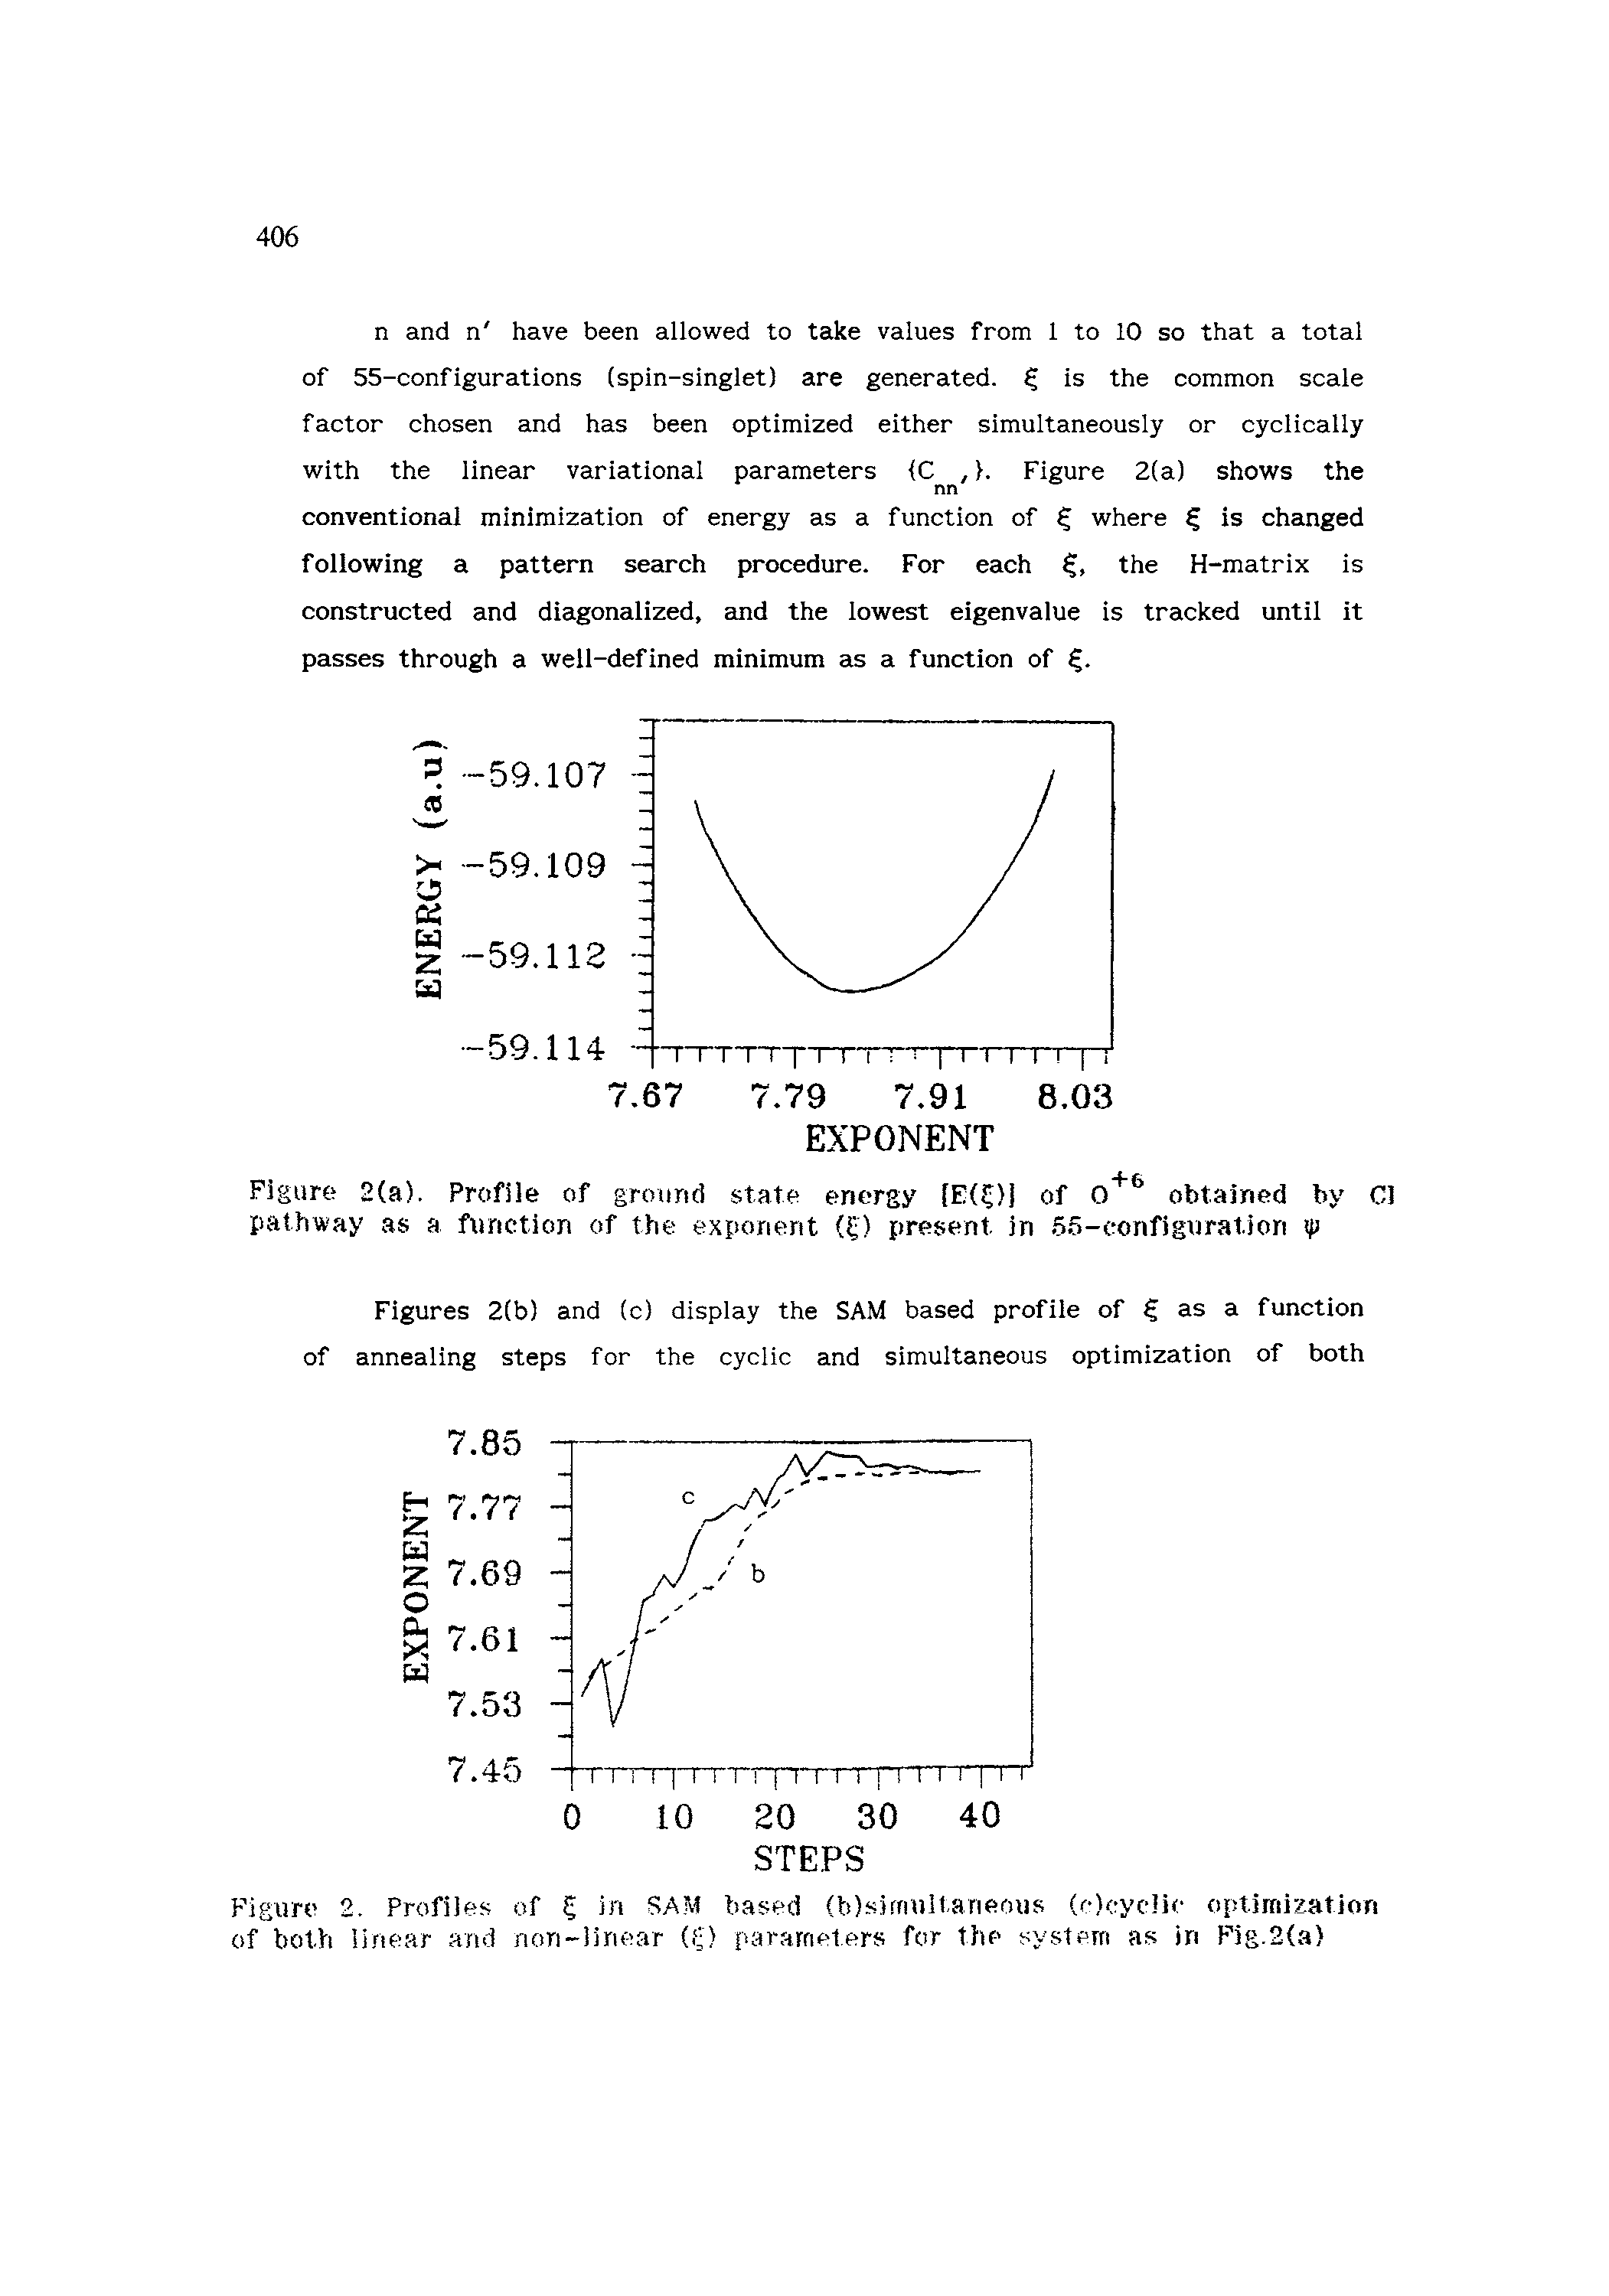 Figure 2. Profiles of in SAM based (b)sirriultarieous (c)cycllc optimization of both linear and non-linear (fp parameters for the system as in Fig.2(a)...